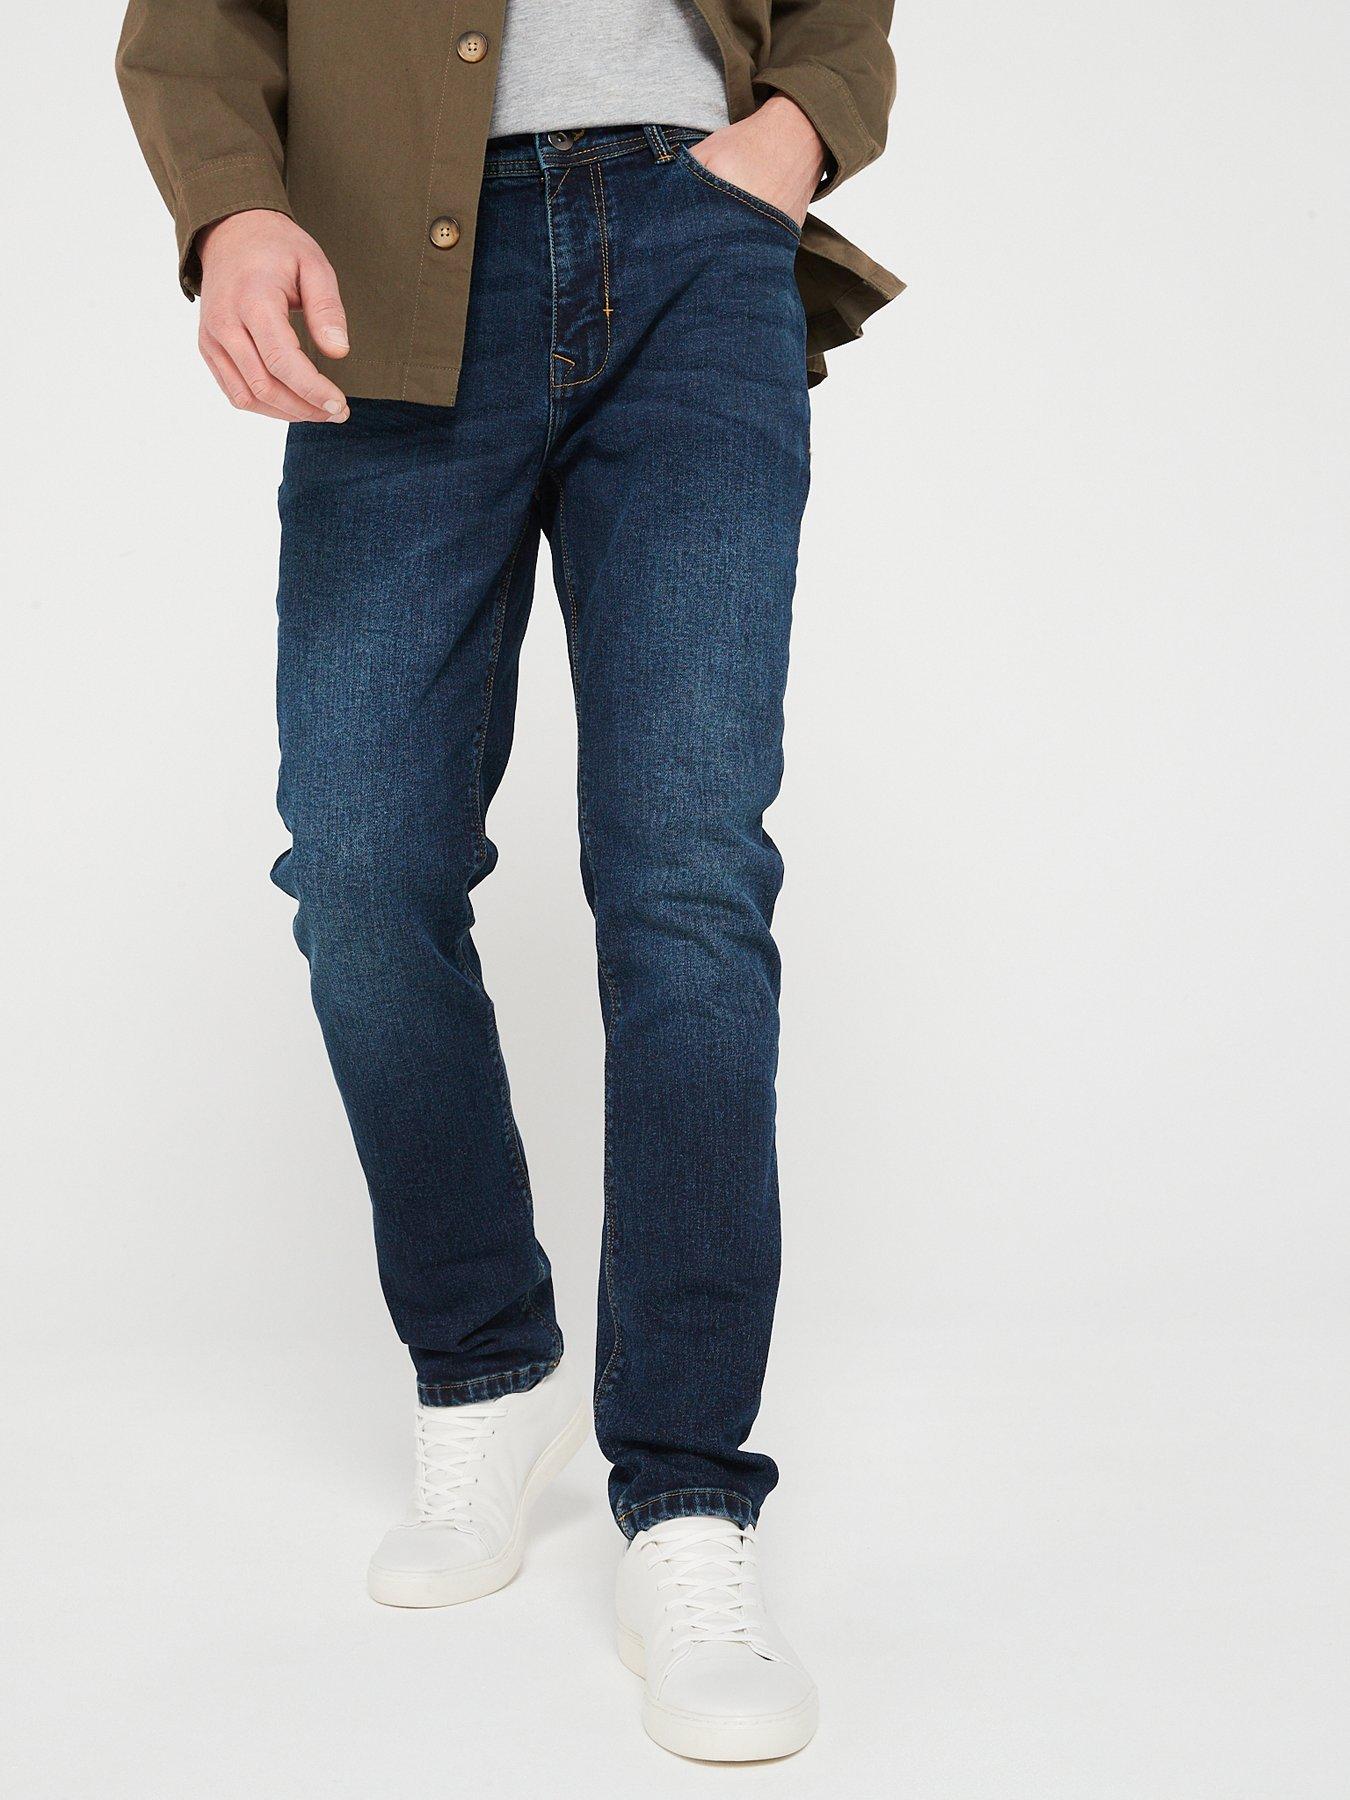 Very Man Slim Jeans With Stretch - Vintage Wash | Very.co.uk